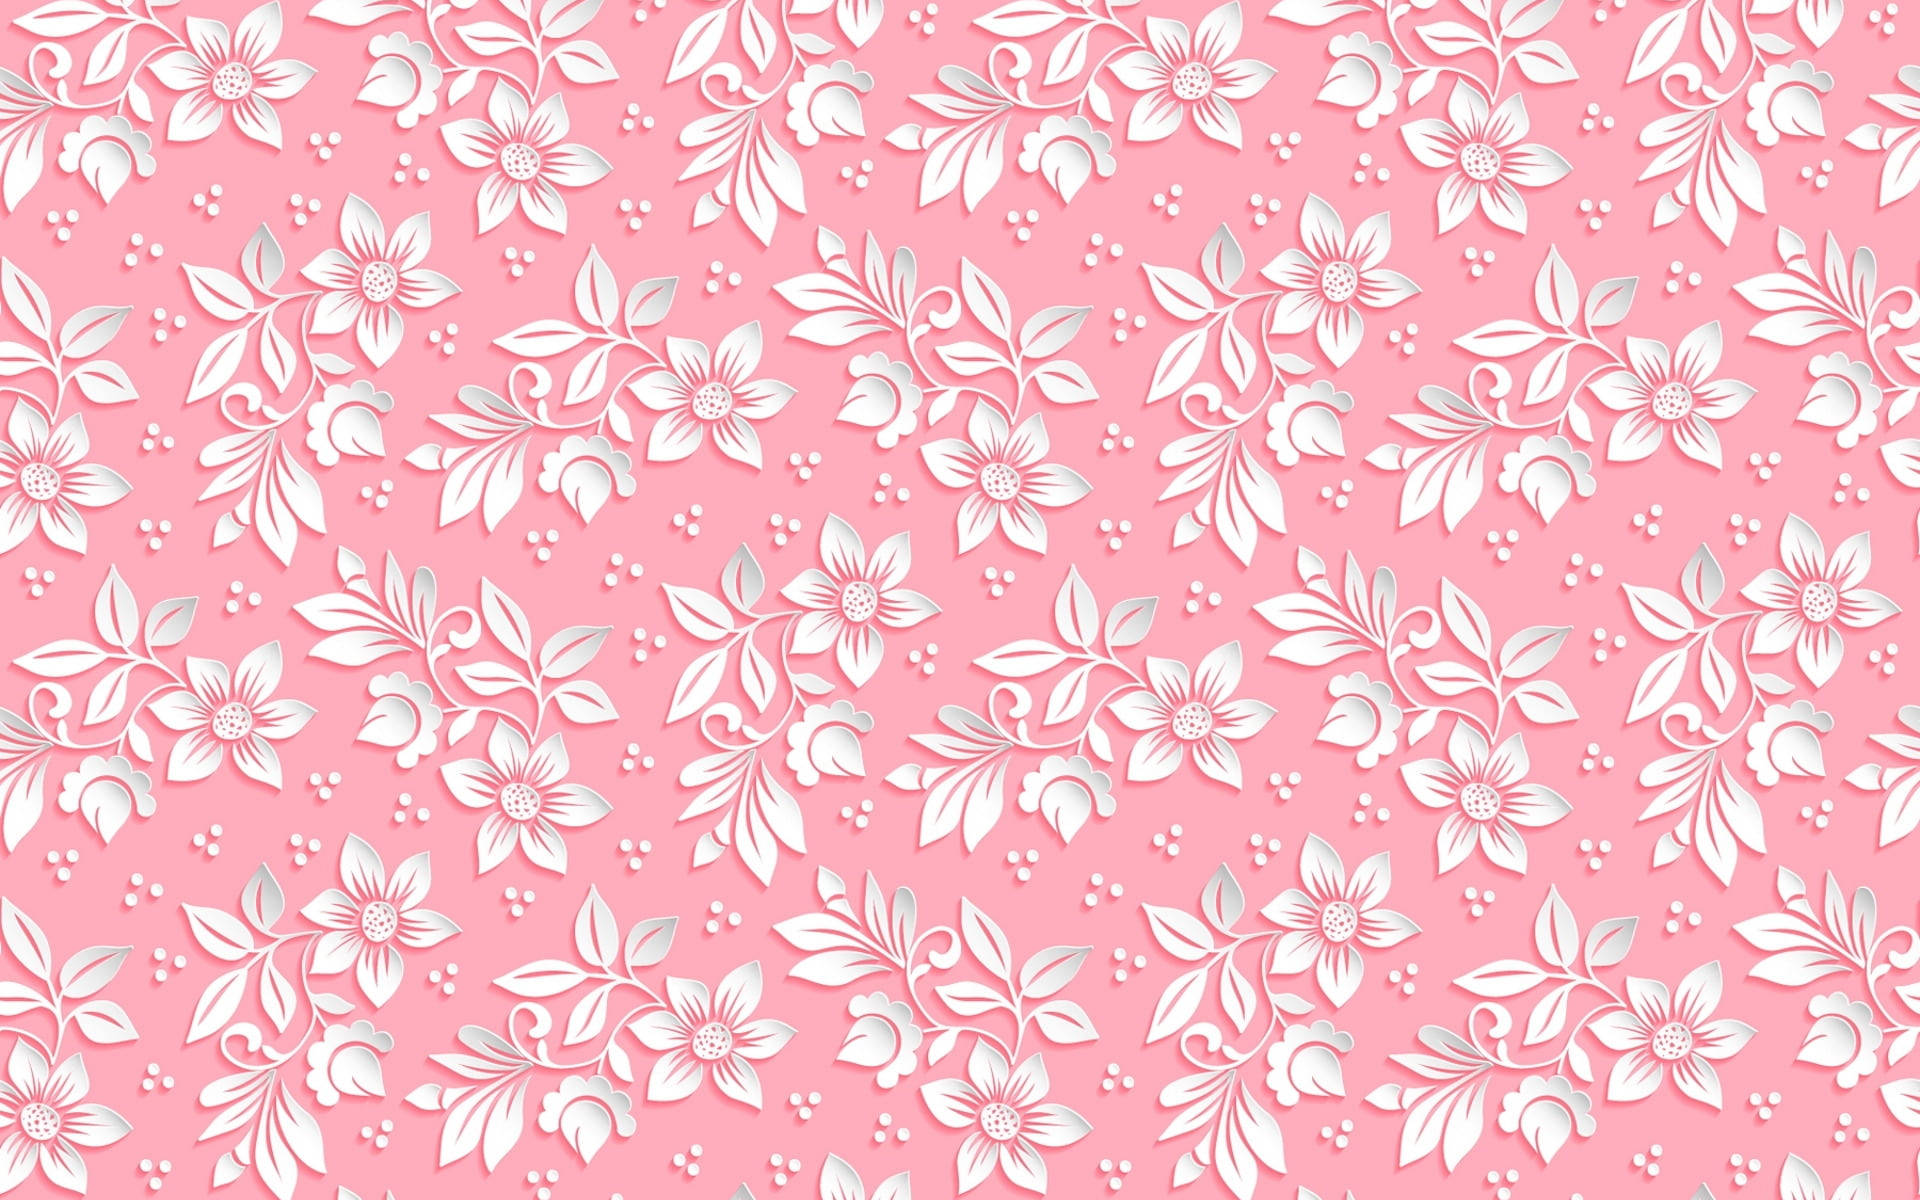 Girly White And Pink Florals Wallpaper